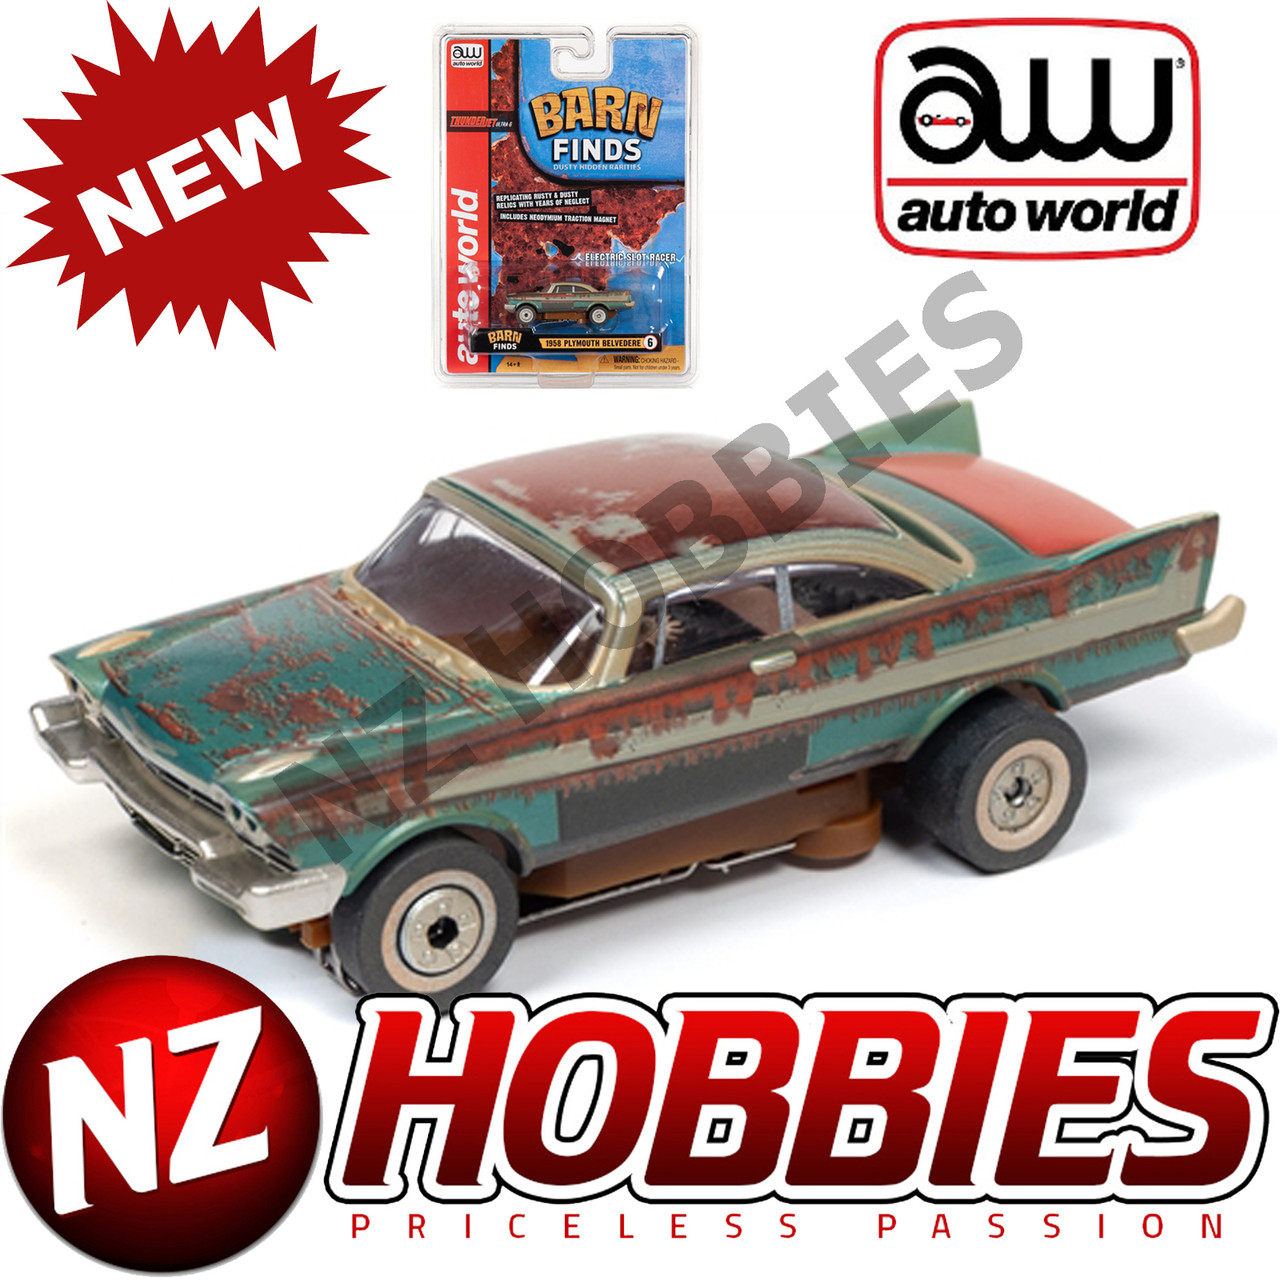 AUTO WORLD SC345 BARN FINDS 1958 PLYMOUTH BELVEDERE THUNDERJETS 1/64 SHOT CAR 